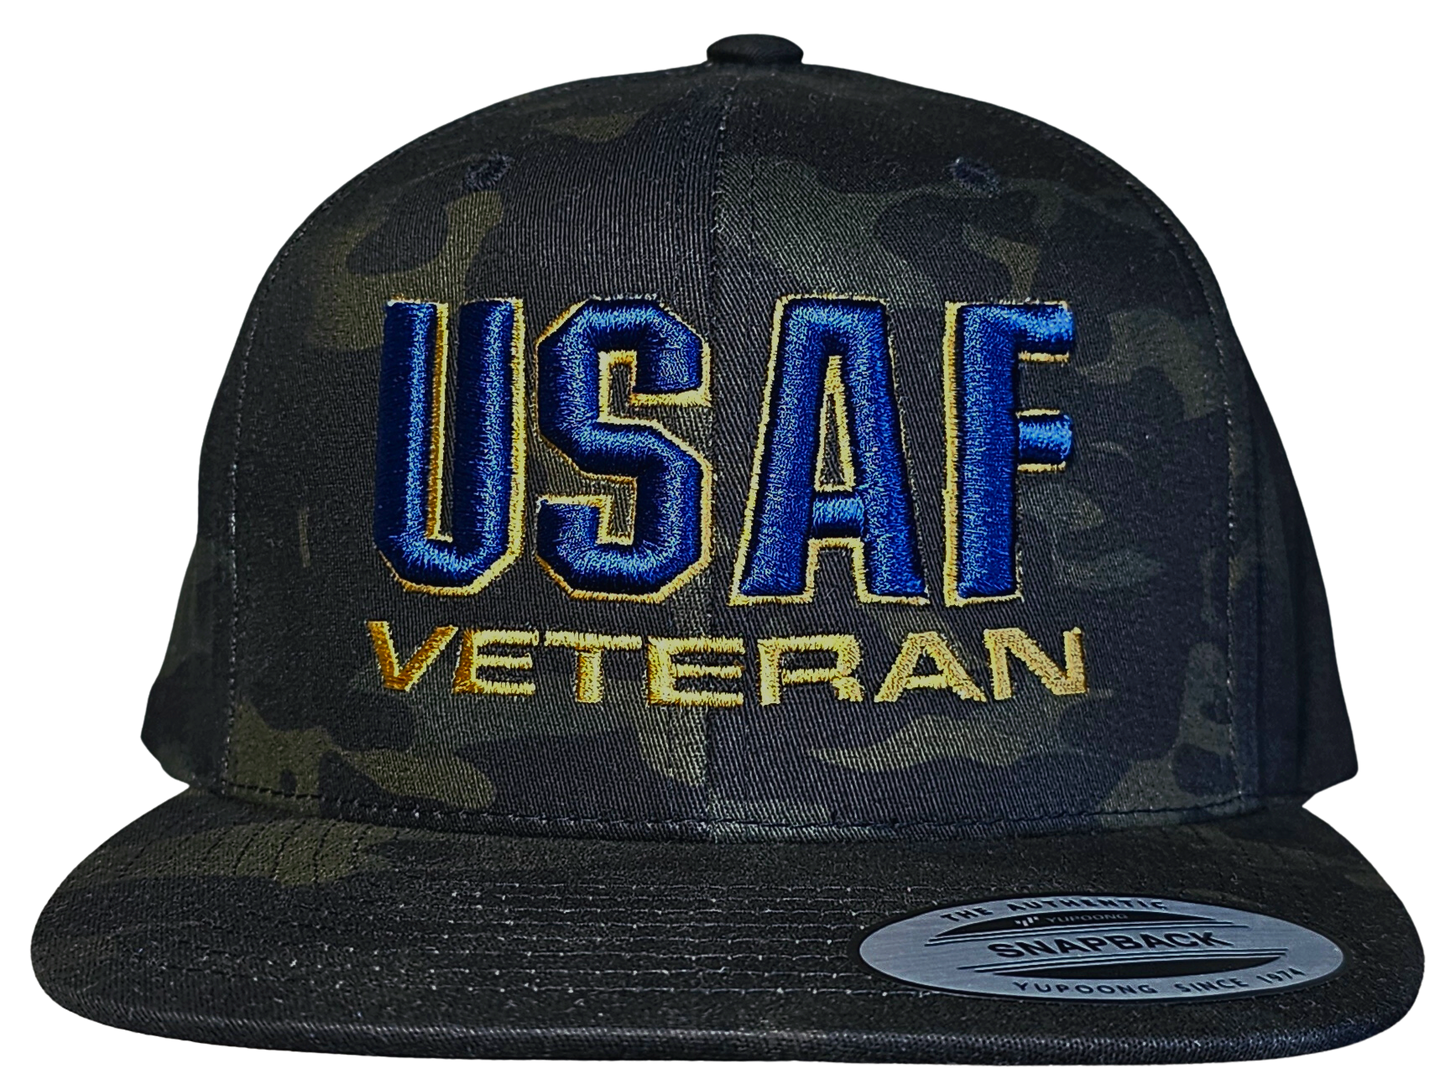 US Air Force Veteran 3D Puff Embroidered Camo Snapback Hat/Cap